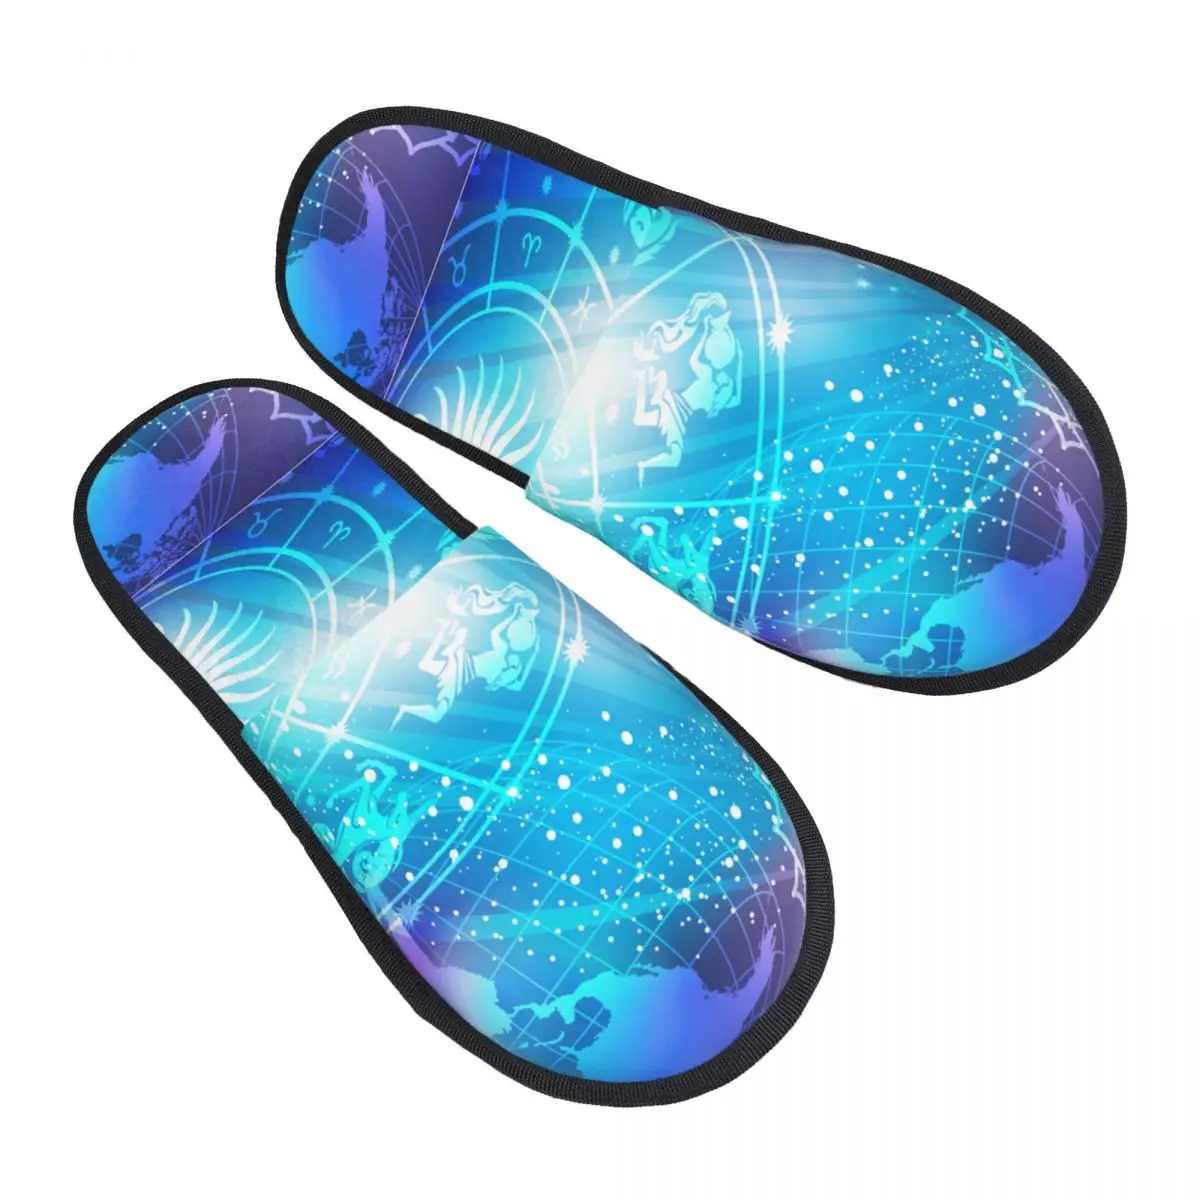 

Blue Background With A Horoscope Slipper For Women Men Fluffy Winter Warm Slippers Indoor Slippers